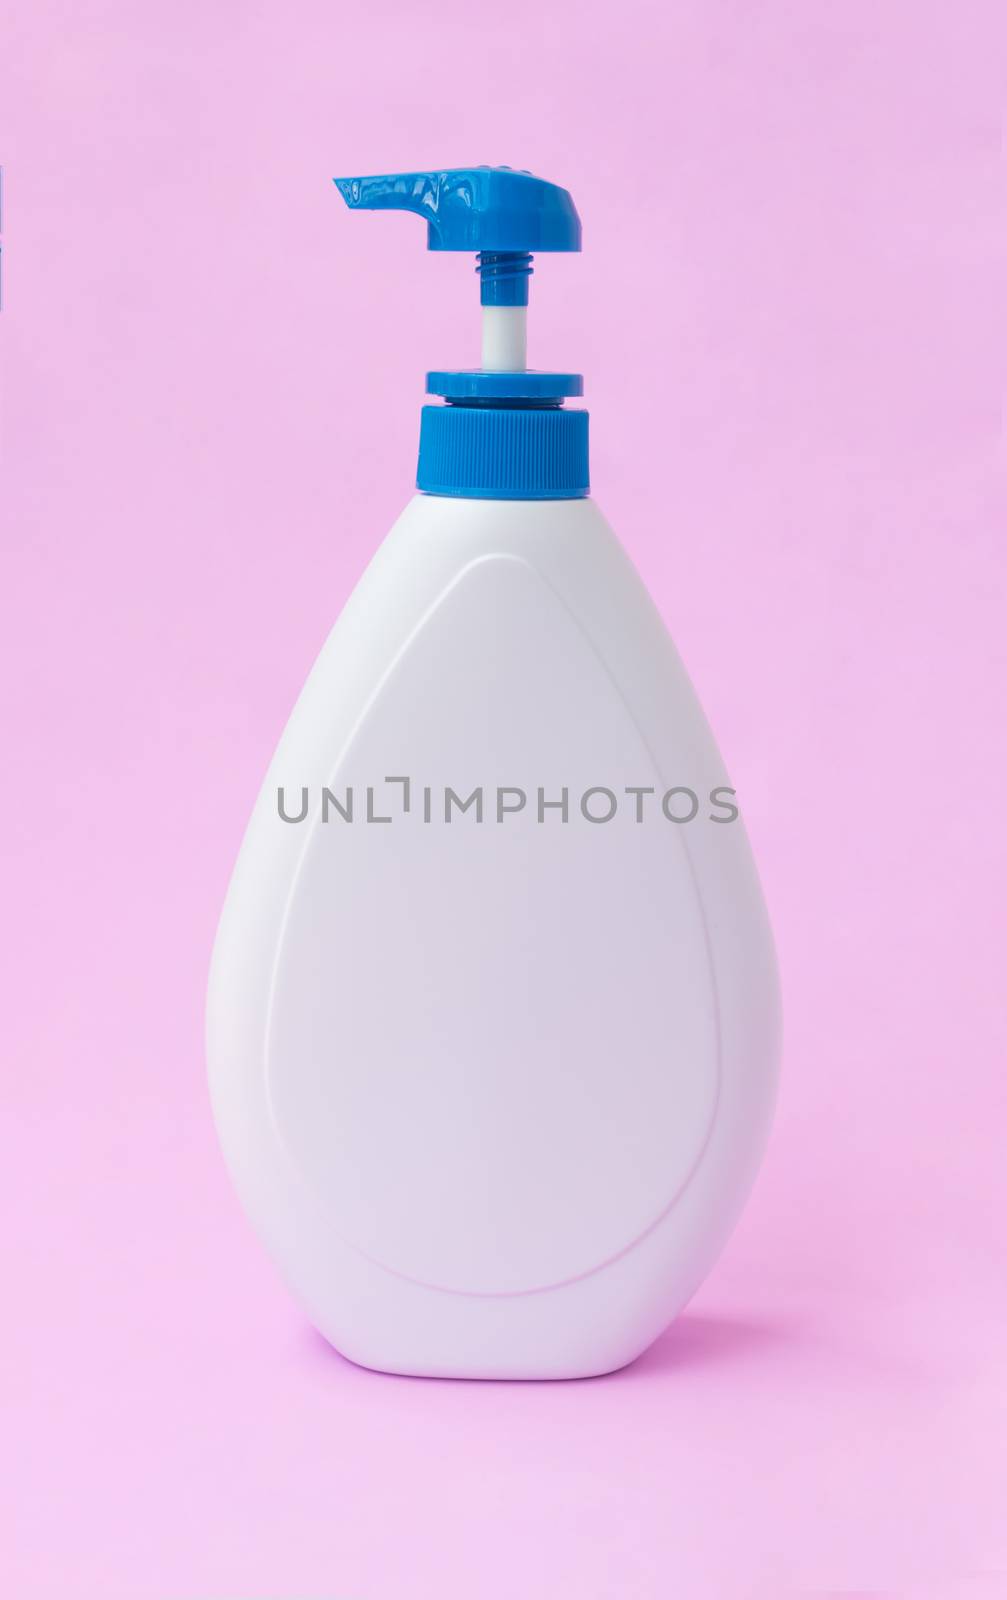 White lotion bottle on pink background, beauty skin care concept